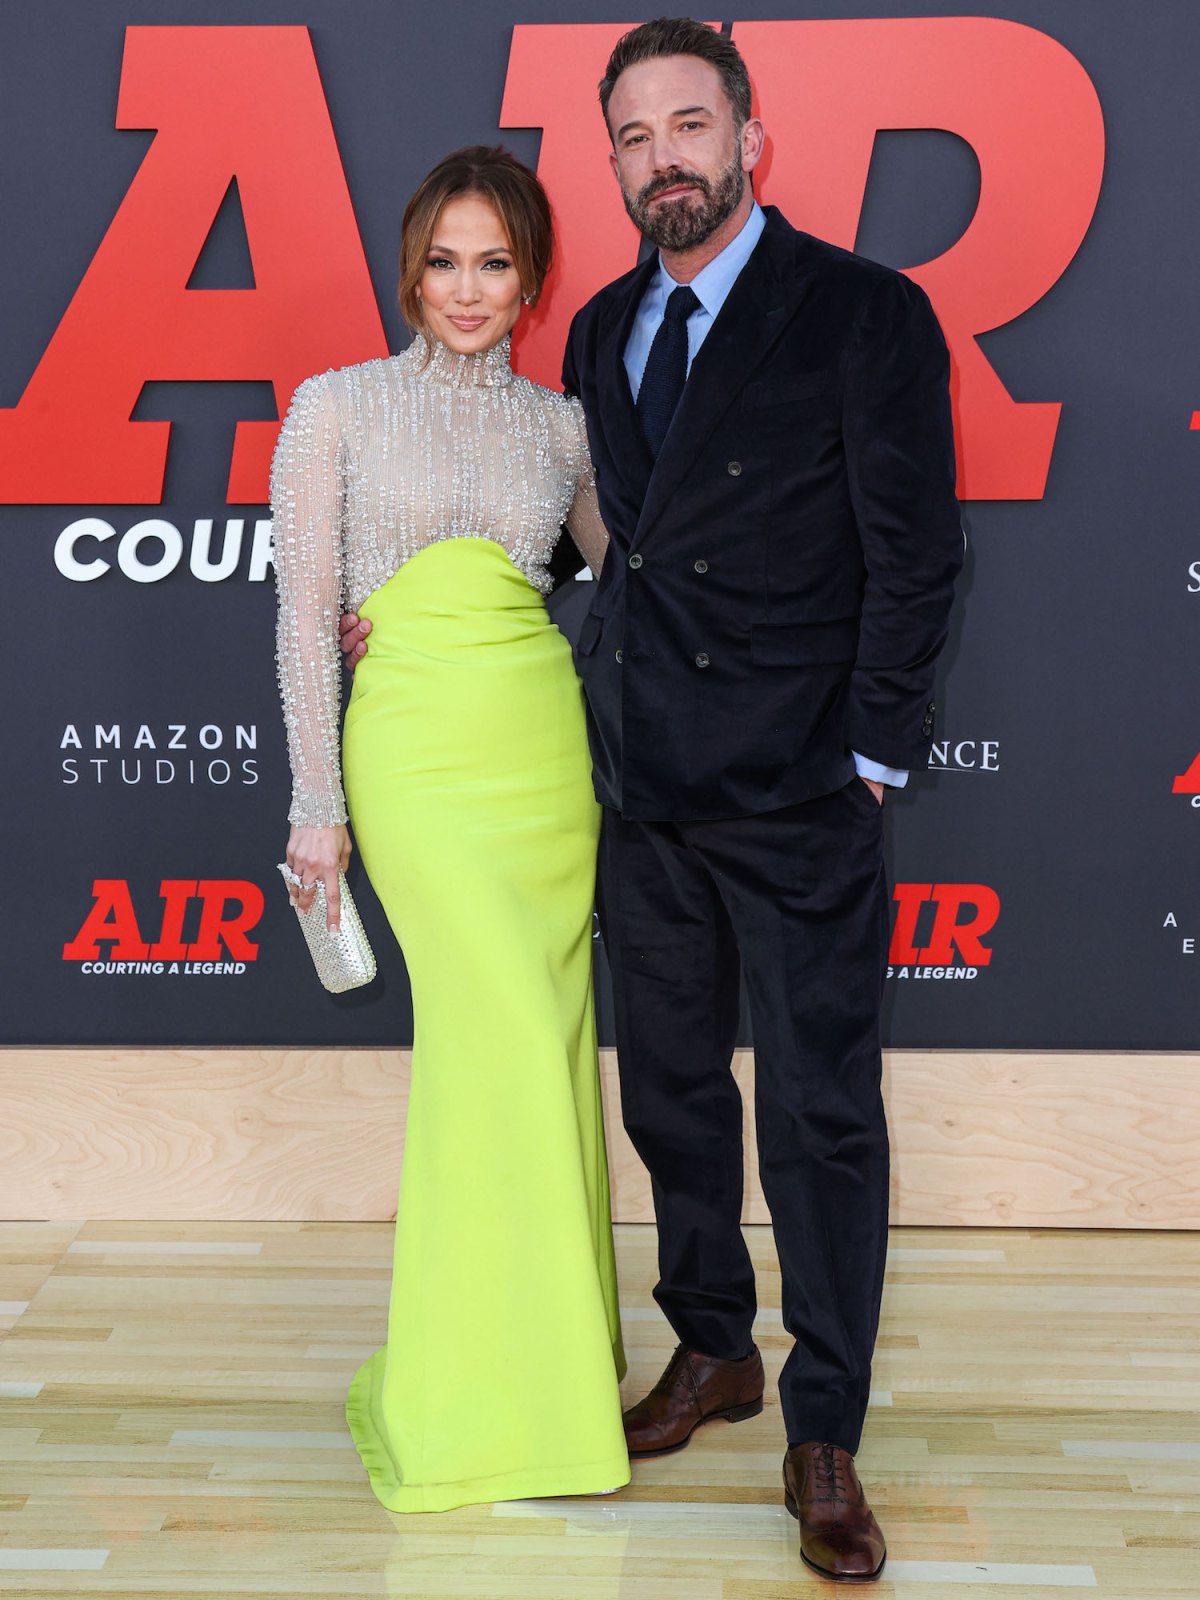 Jennifer Lopez looked oh-so chic while shopping for items for the new home  she and Ben Affleck reportedly purchased together. We've got…